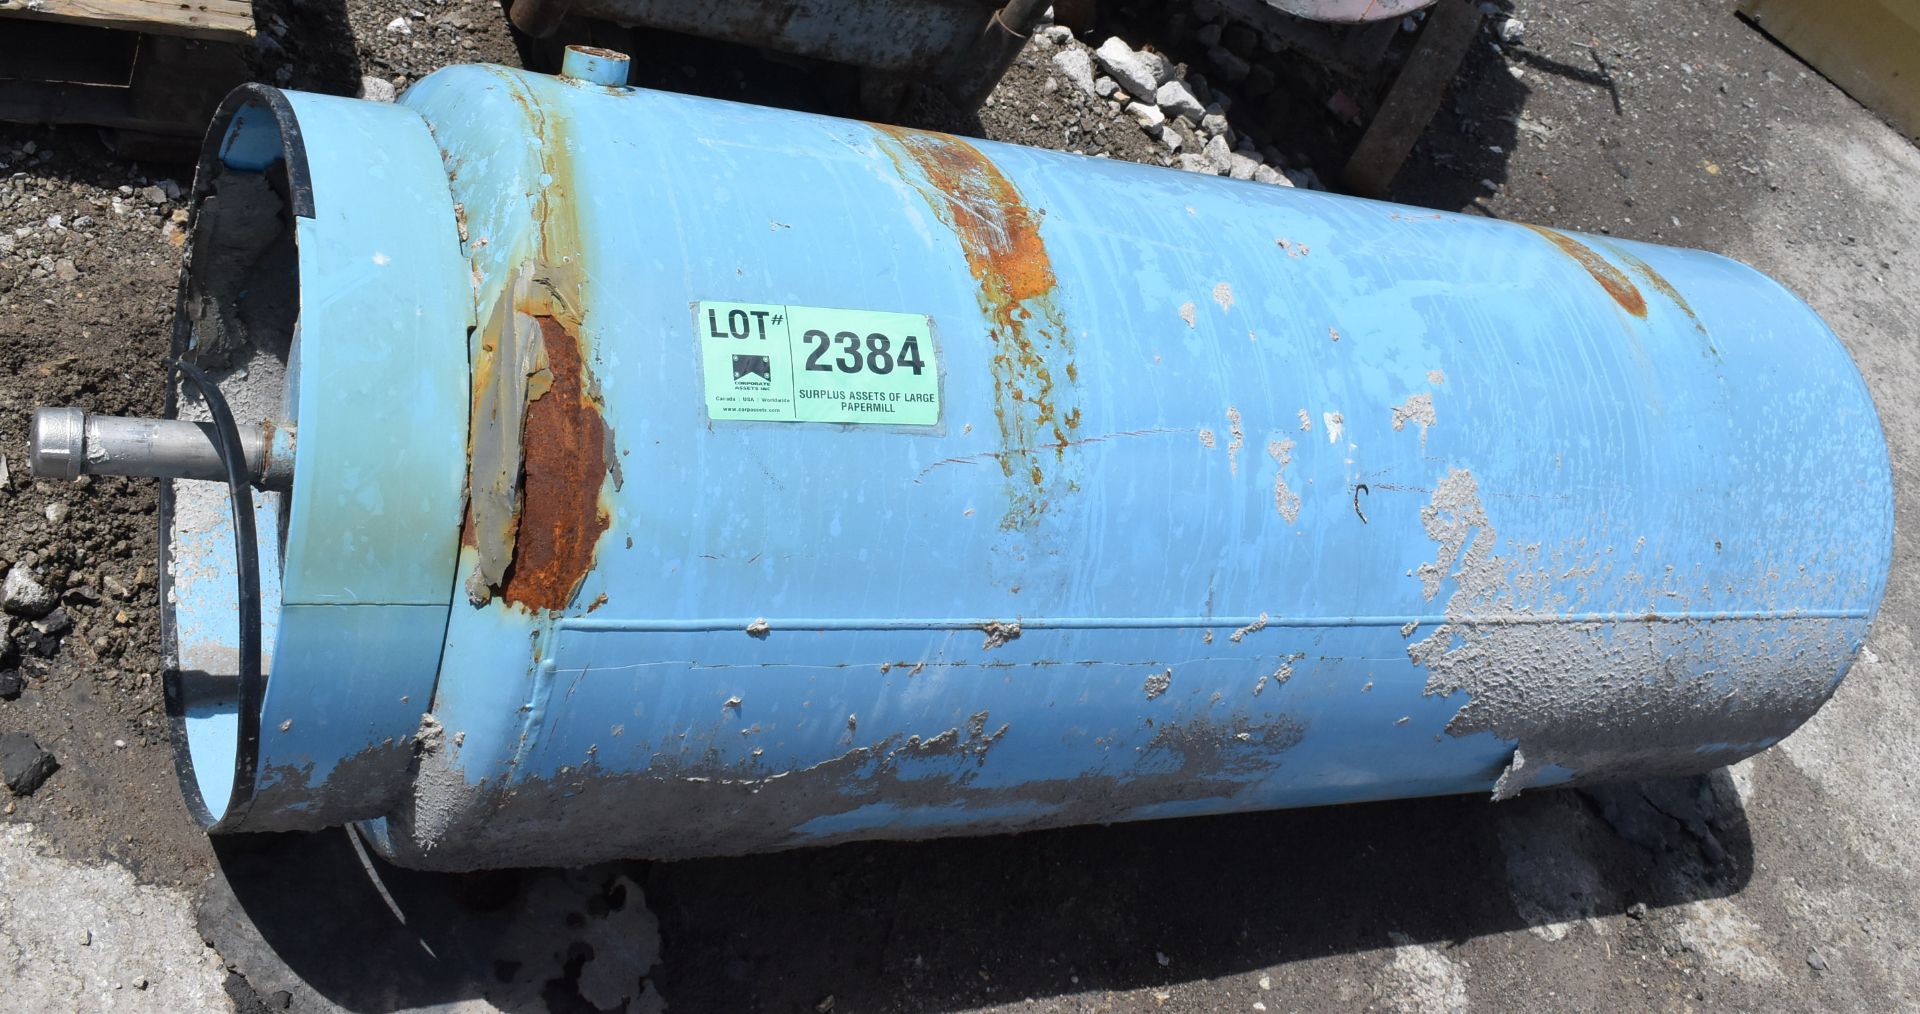 AIR RECEIVER TANK/PRESSURE VESSEL APPROX. 24" DIA. X 58" H [RIGGING FEE FOR LOT #2384 - $25 USD PLUS